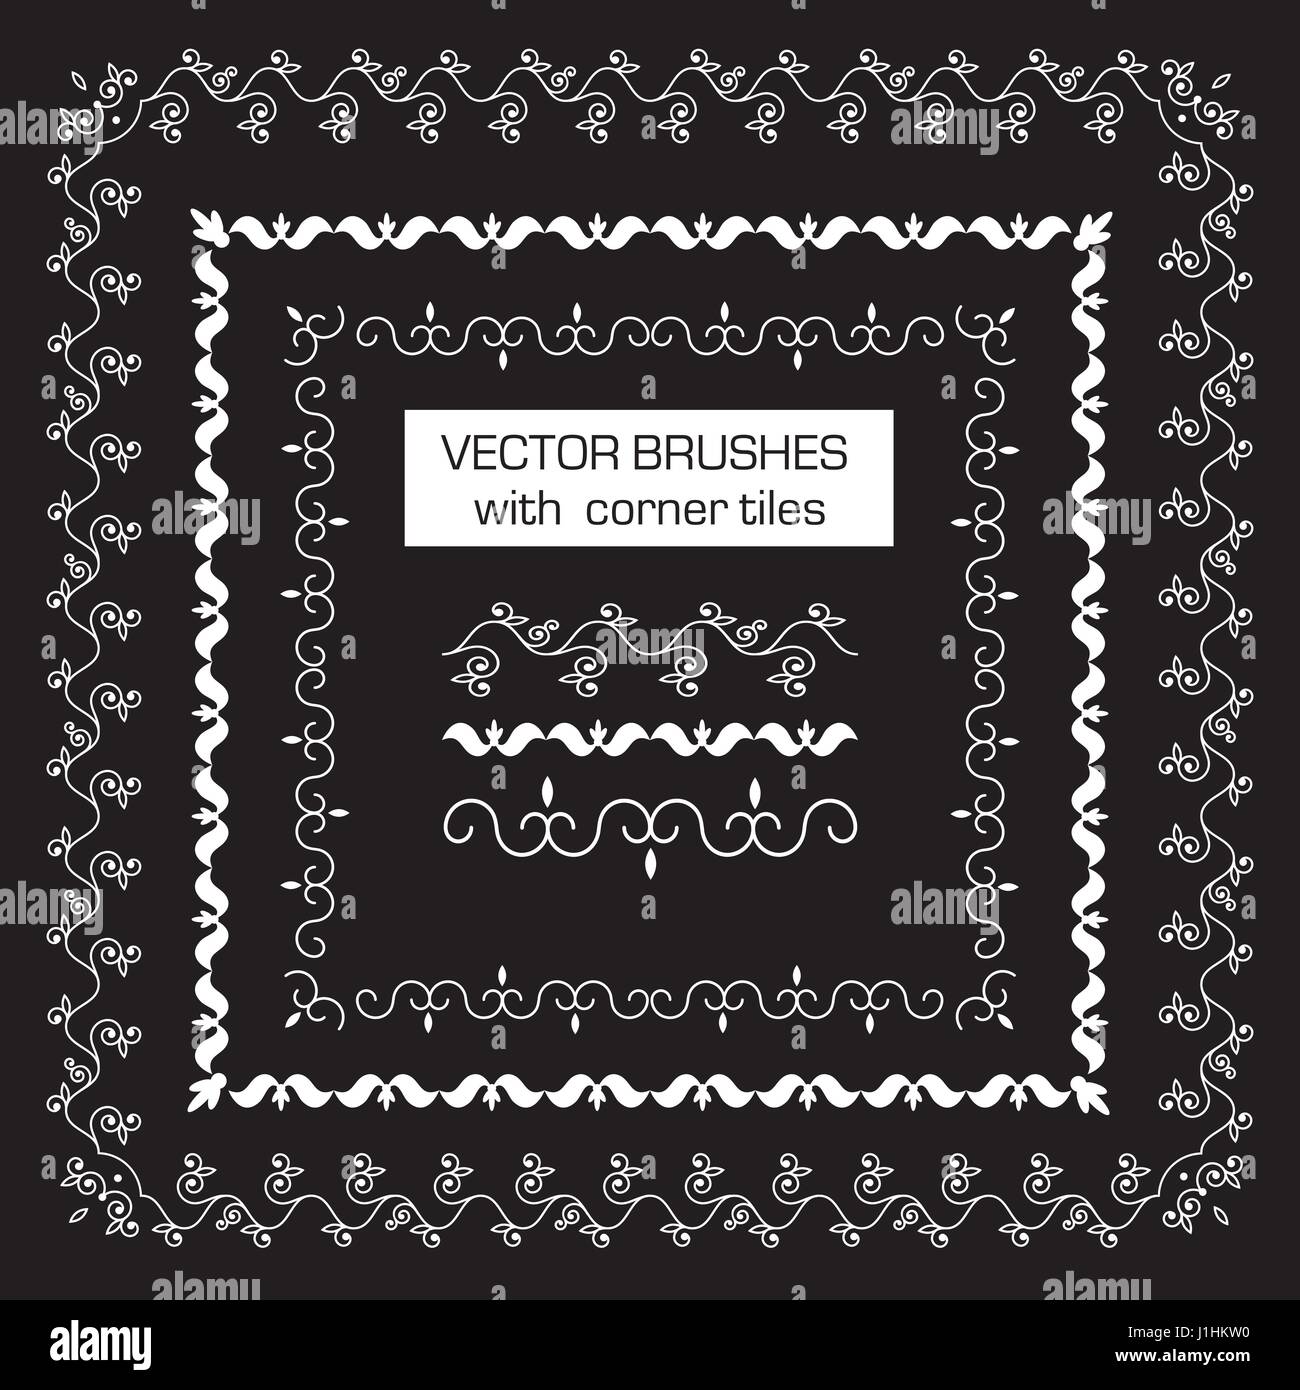 decorative vector brushes with outer corner tiles for borders, ornaments.   Stock Vector